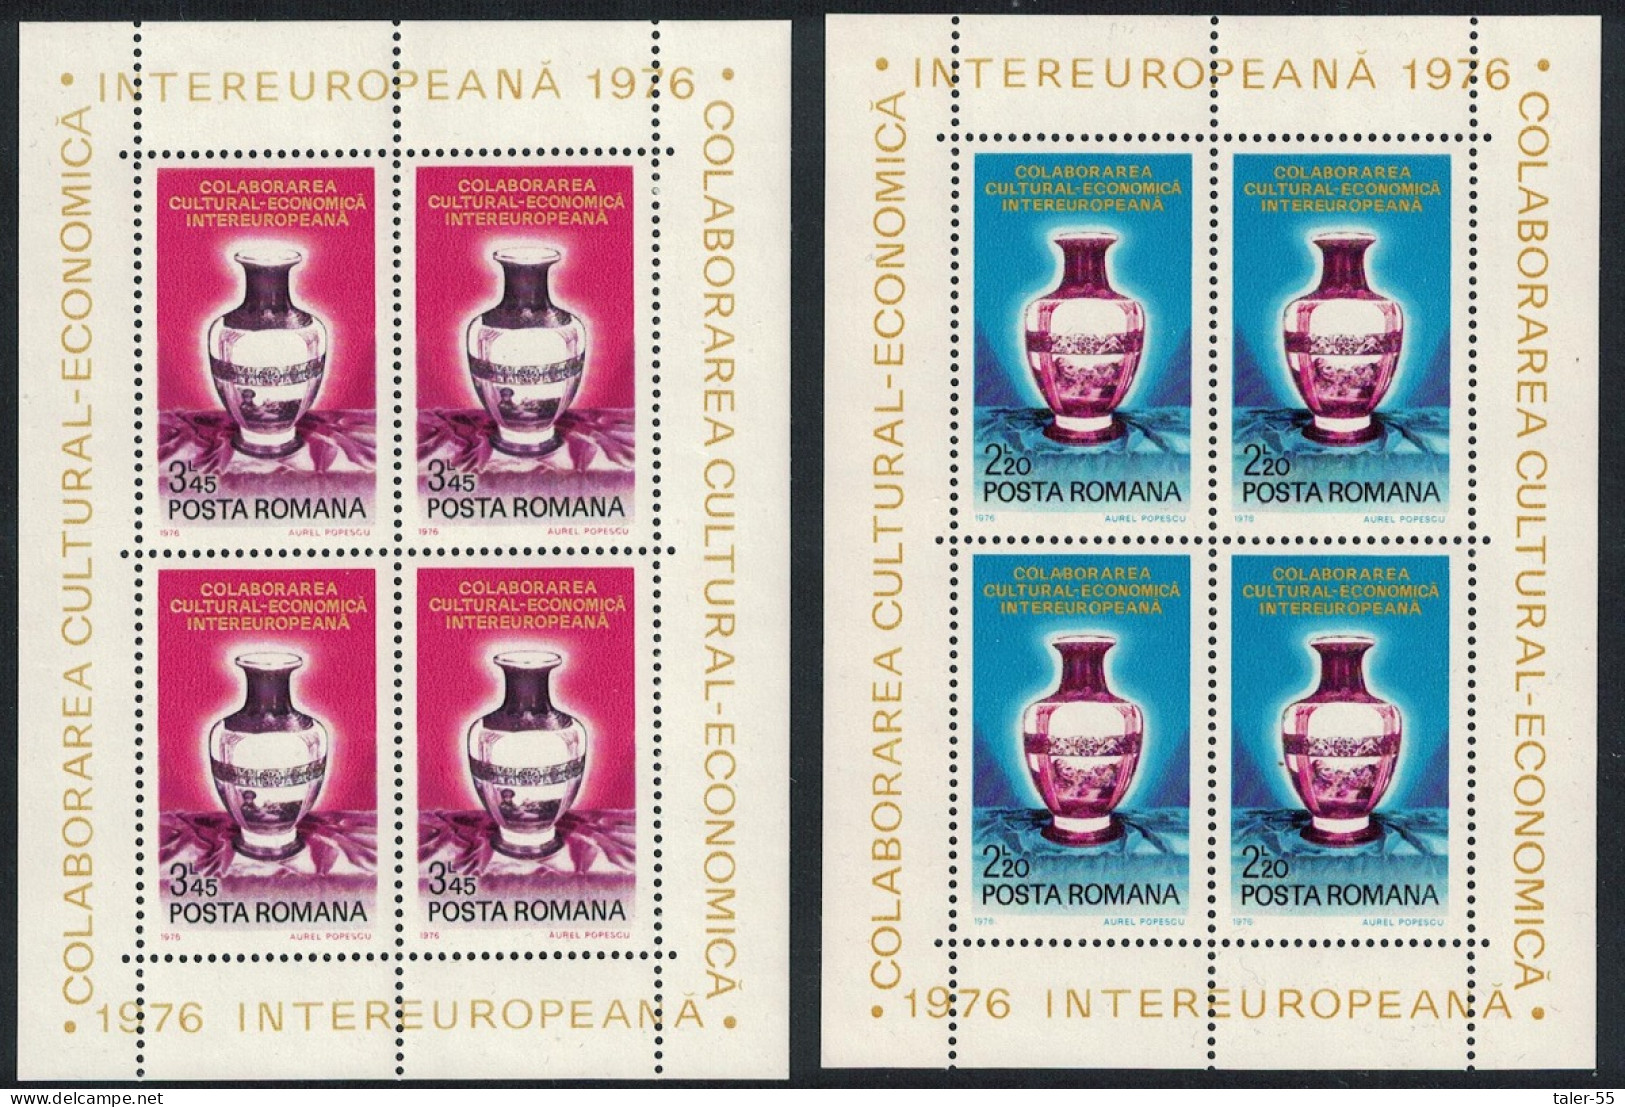 Romania Vases From Cluj-Napoca Porcelain Factory 2v Sheetlets 1976 MNH SG#4215-4216 - Unused Stamps